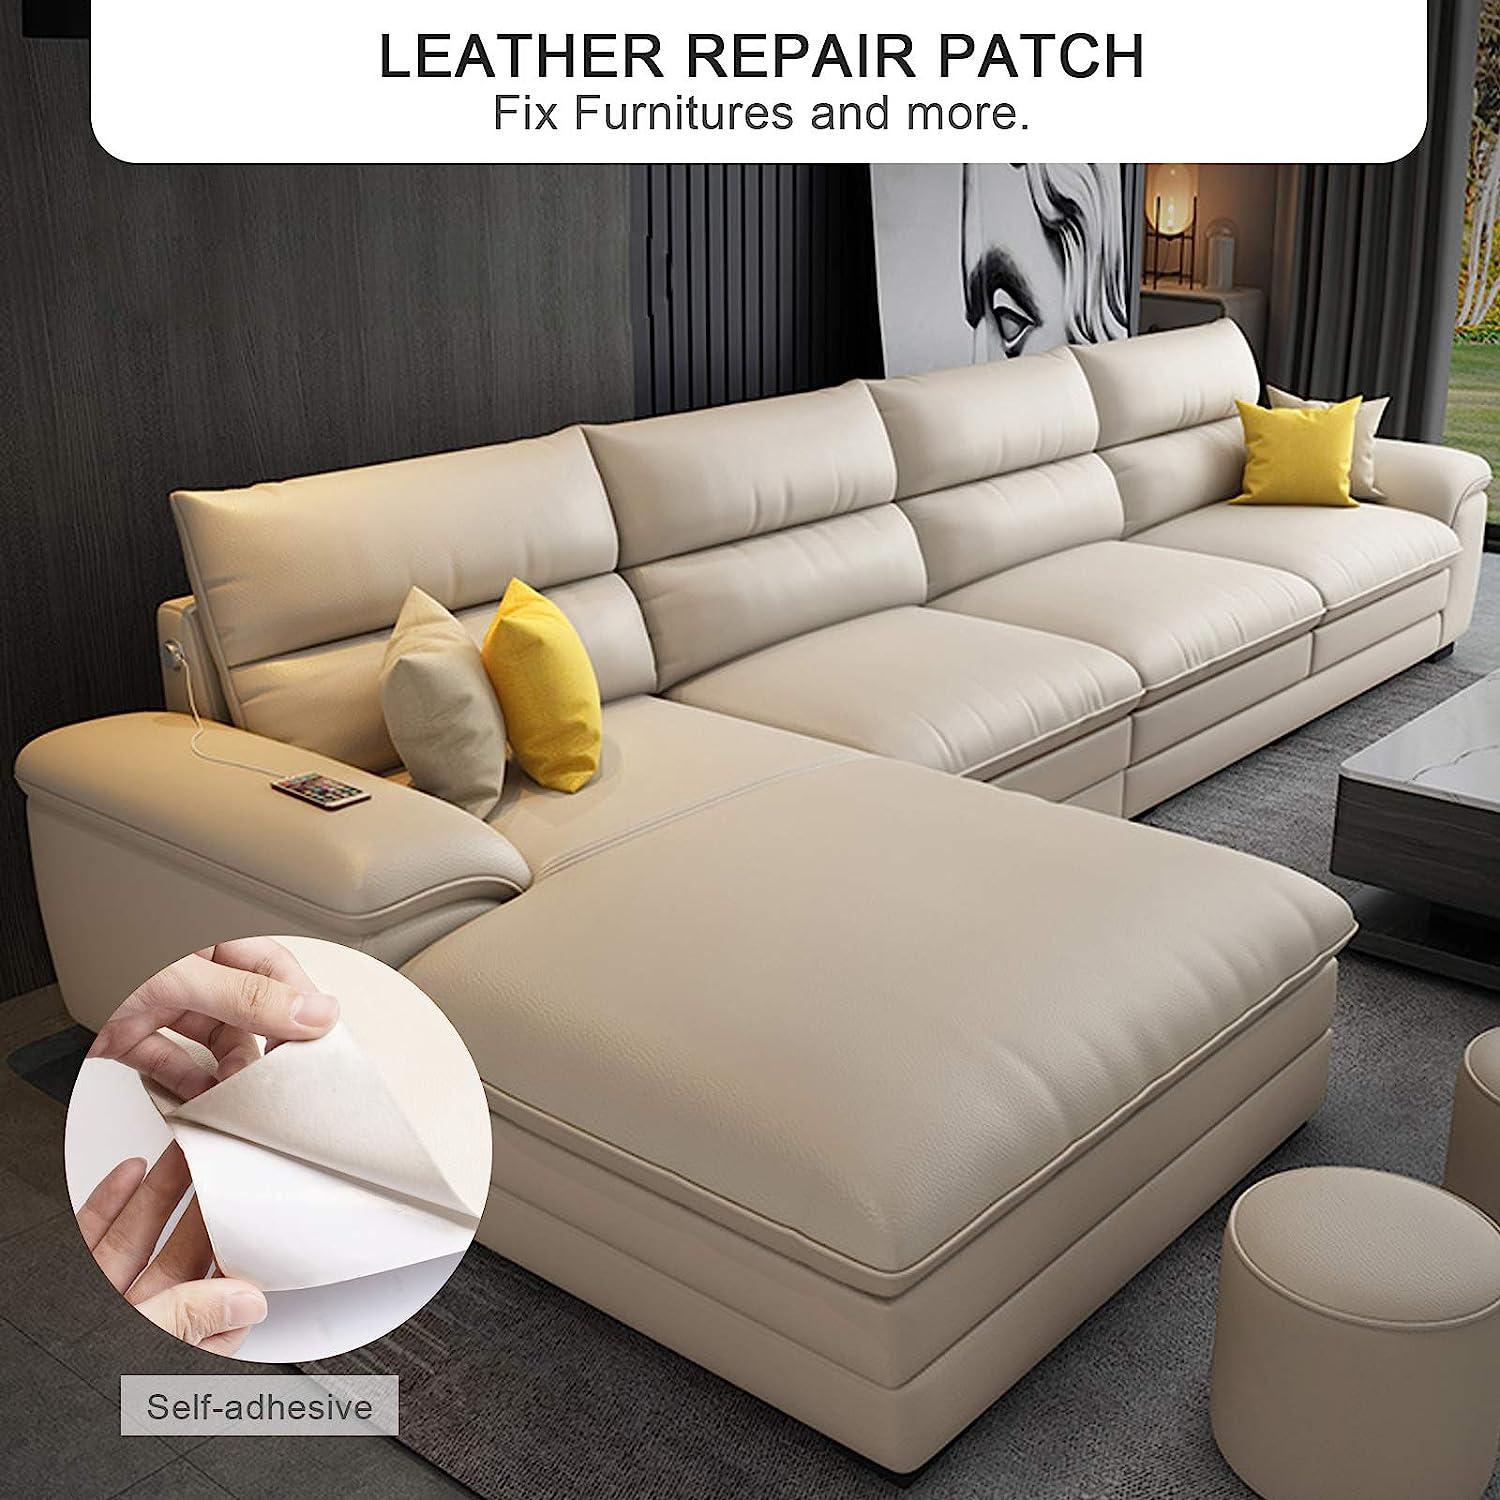 Self Adhesive Leather Repair Kit Furniture 8.3×11 inch Leather Patch Tape  for Car Seat, Couch Jacket Sofa Dark Brown